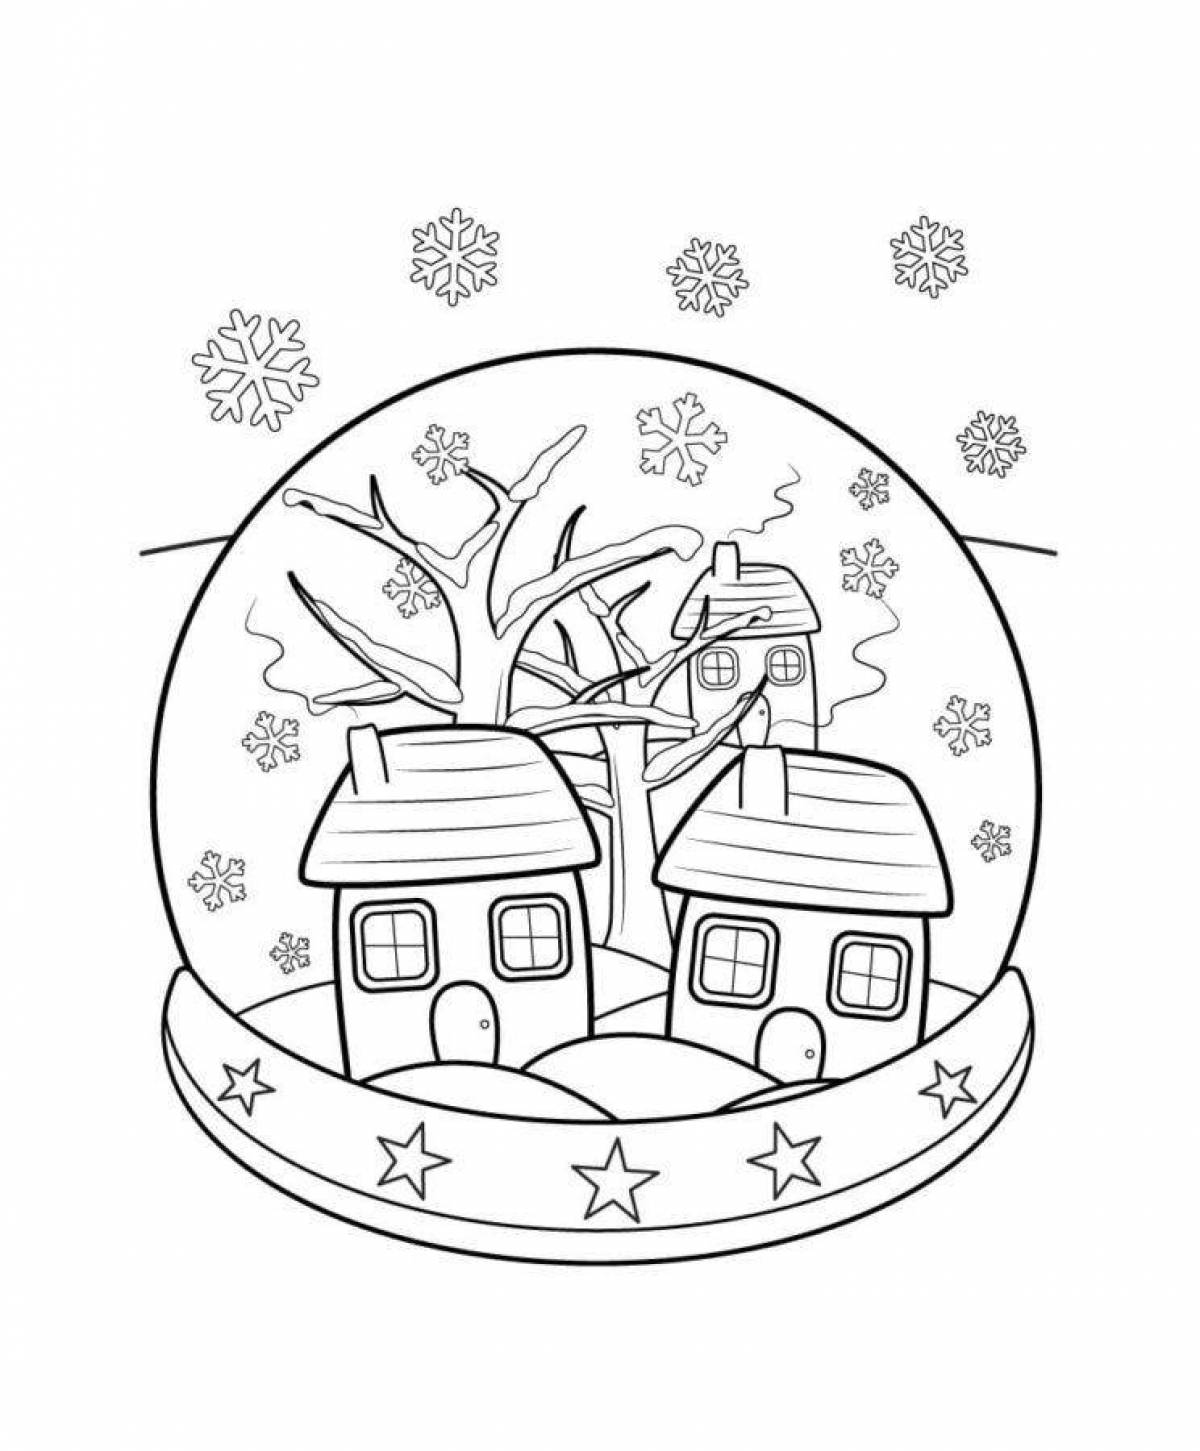 Coloring page dazzling winter ball